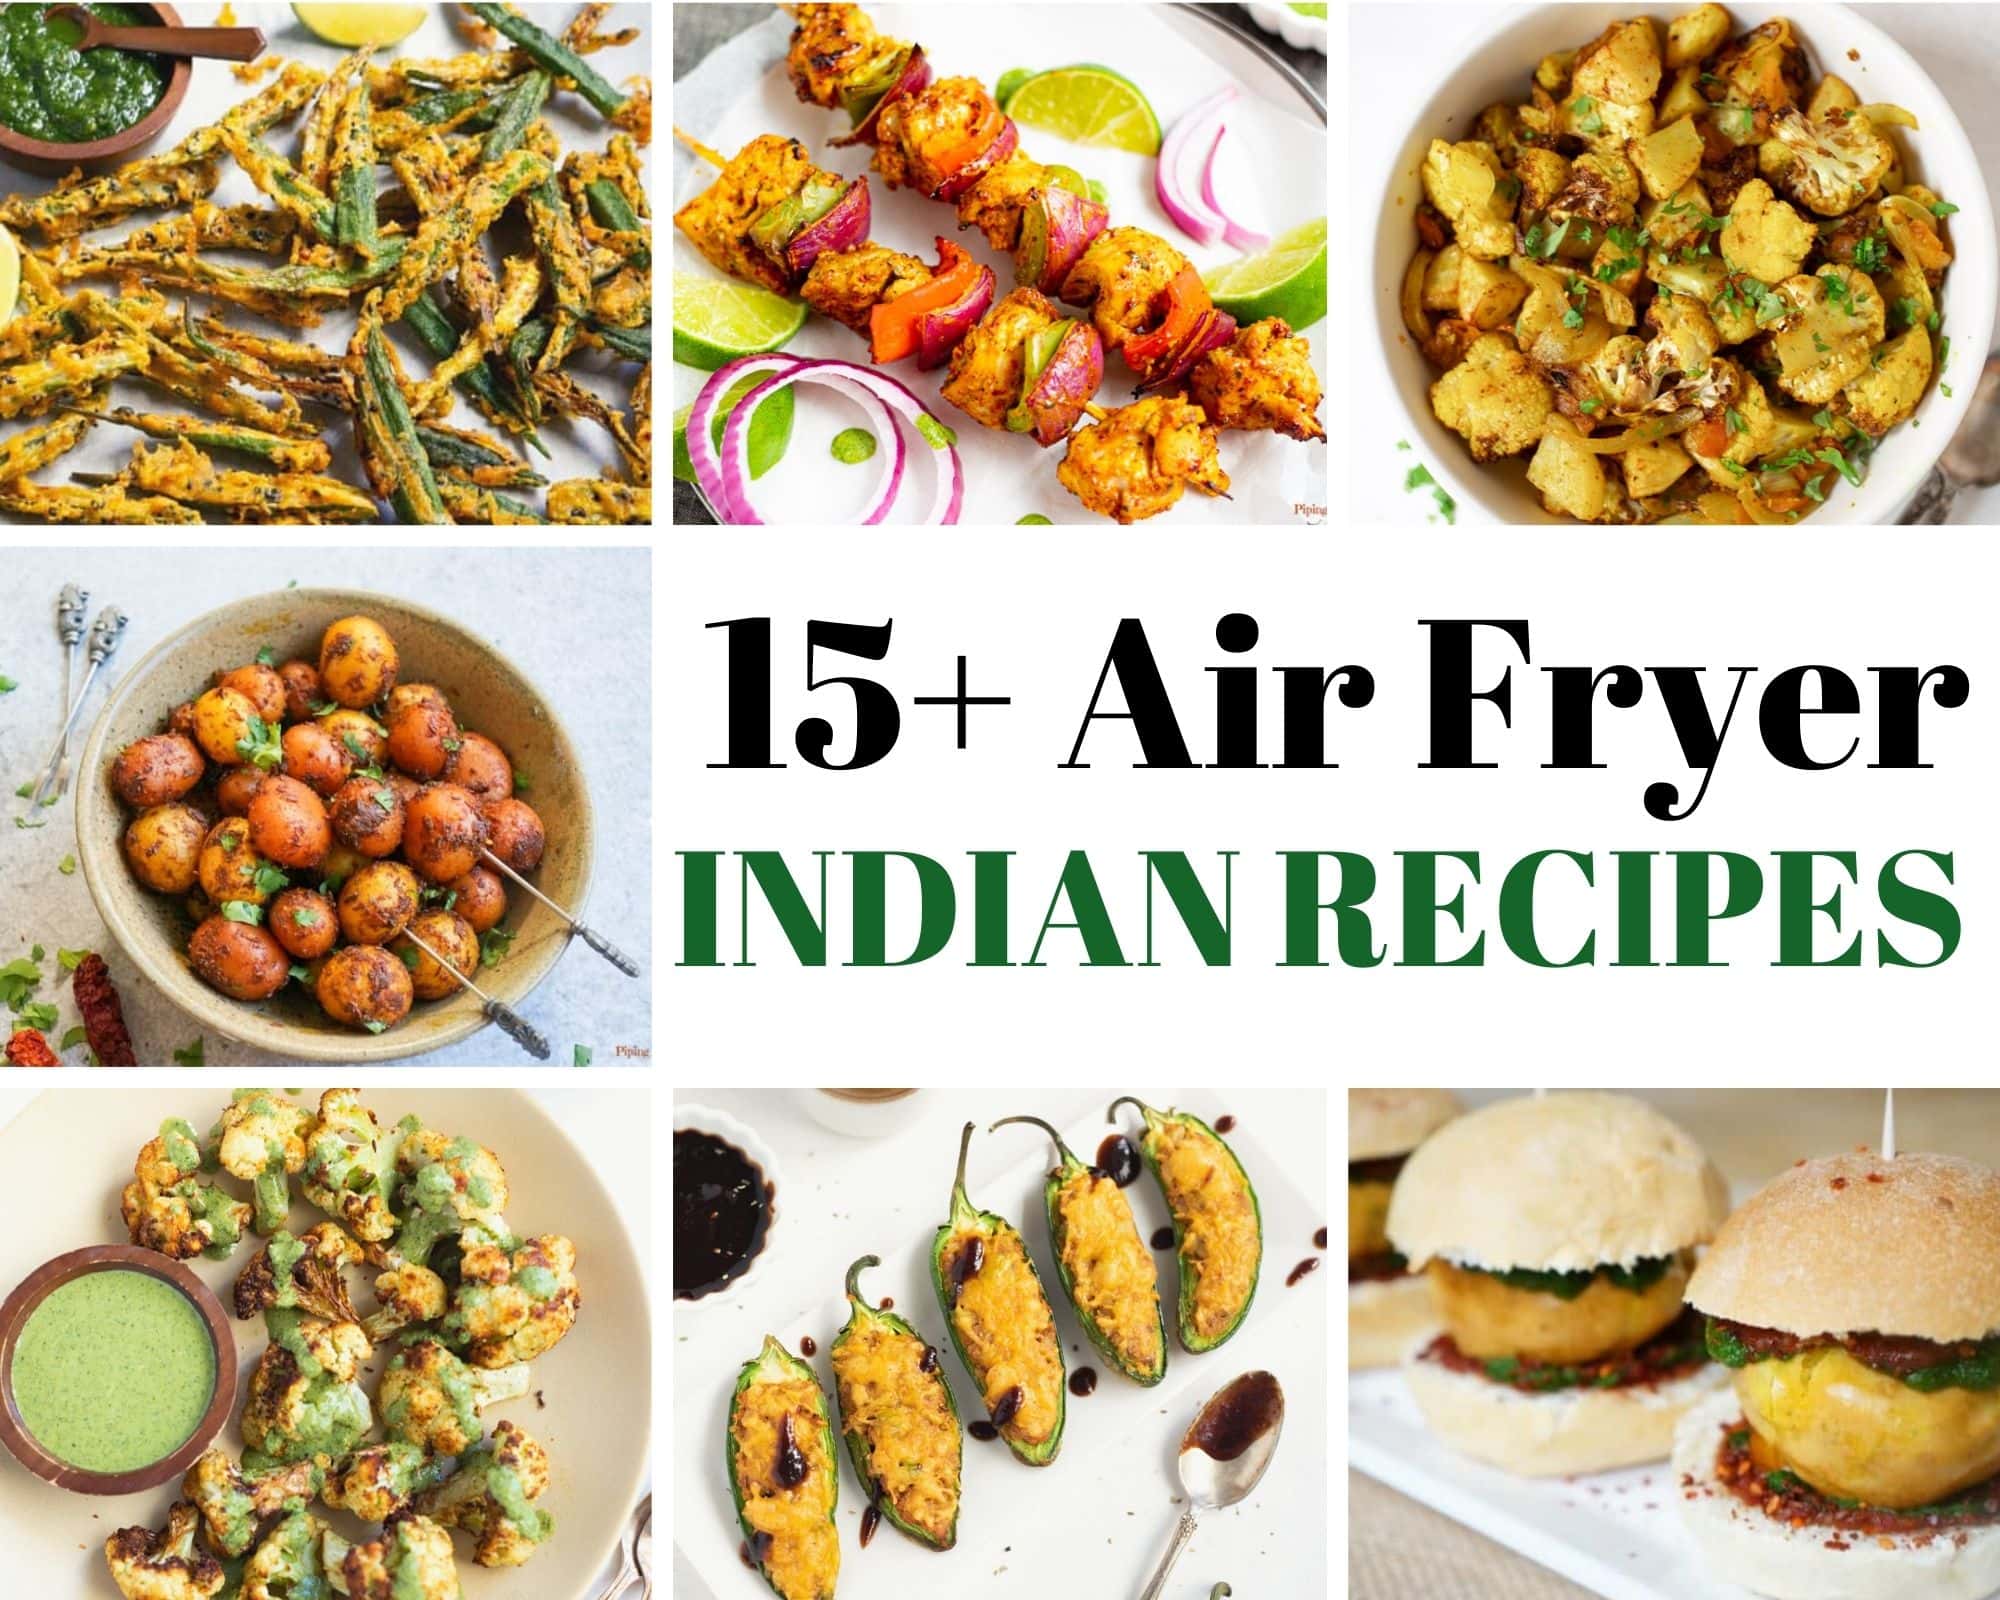 Air fryer indian recipes collage 